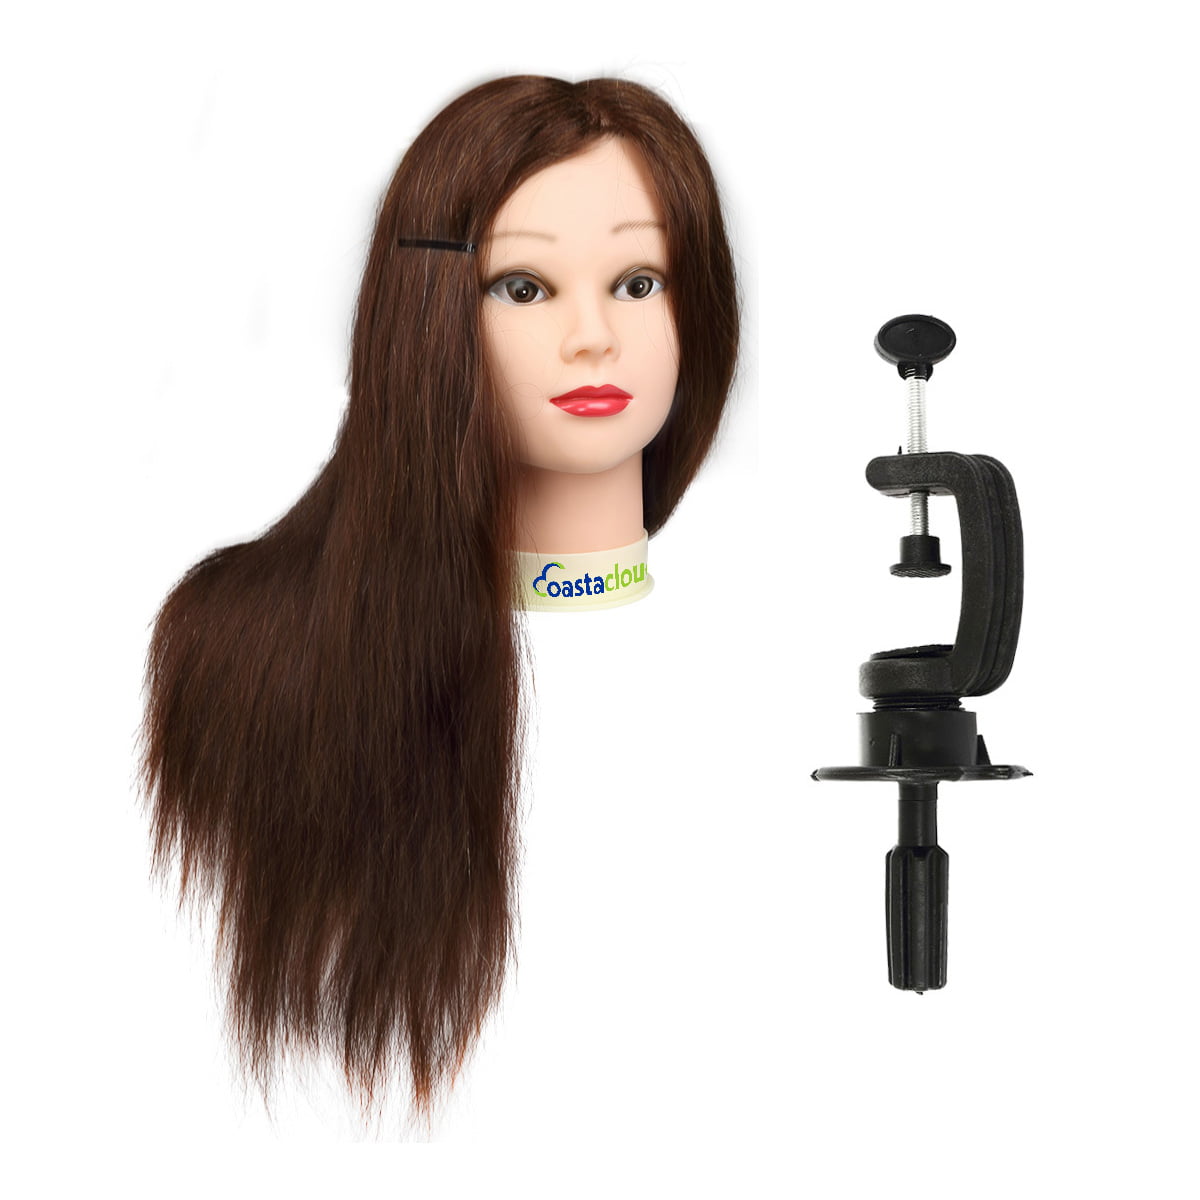 24 Cosmetology Mannequin Head with Human Hair - Daisy